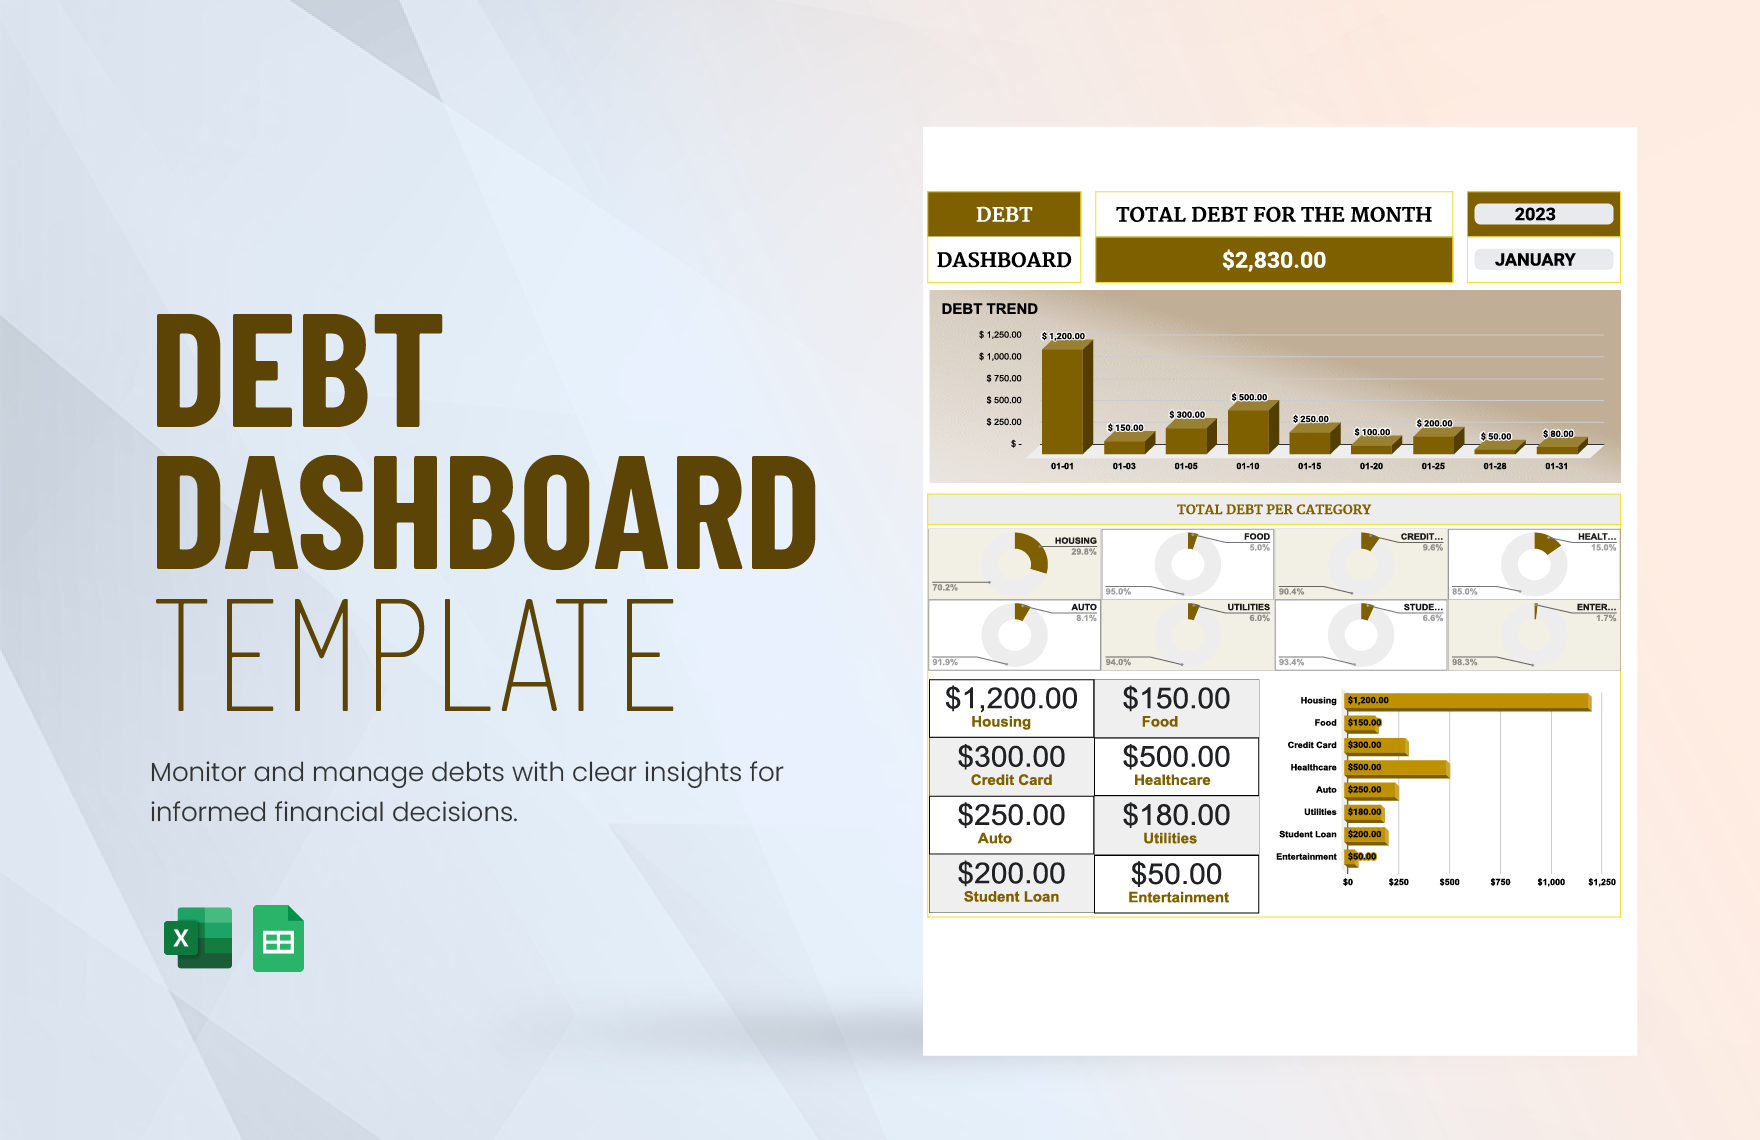 Debt Dashboard Template in Excel, Google Sheets